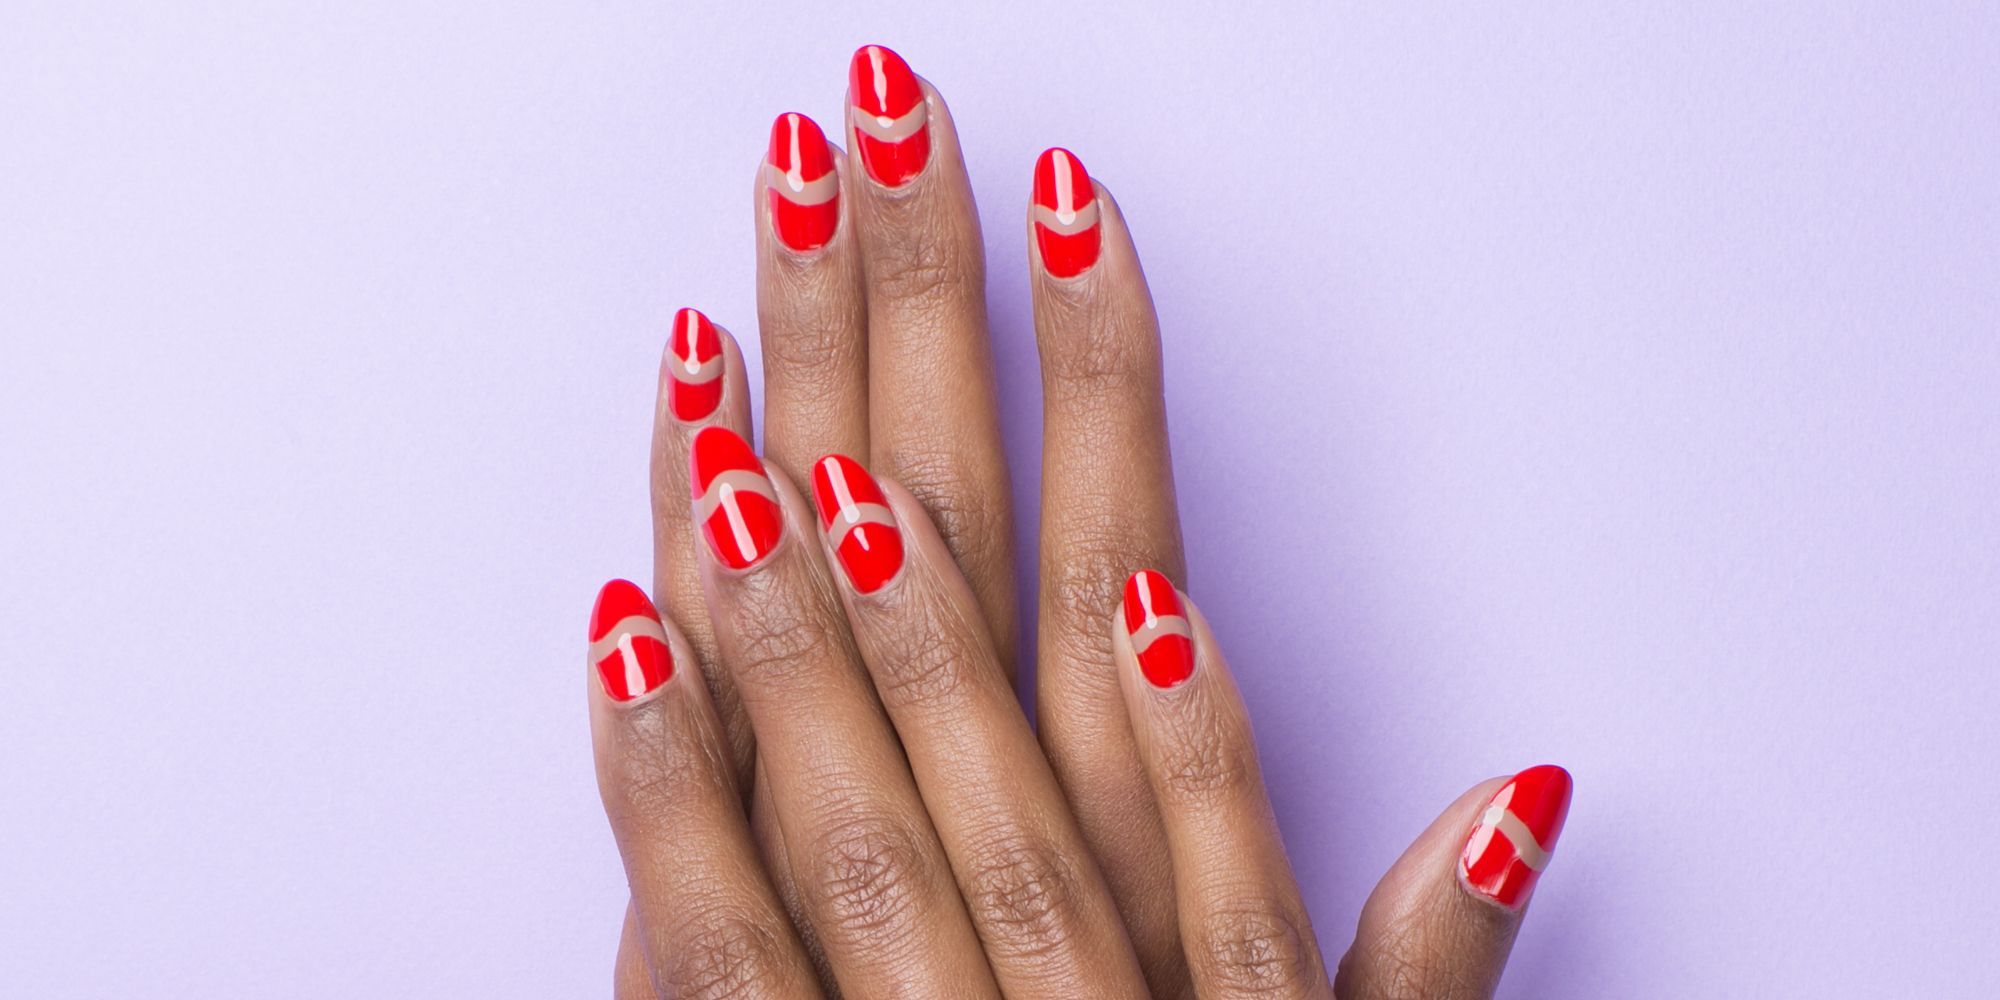 Red and White Manicure With Love Print · Free Stock Photo